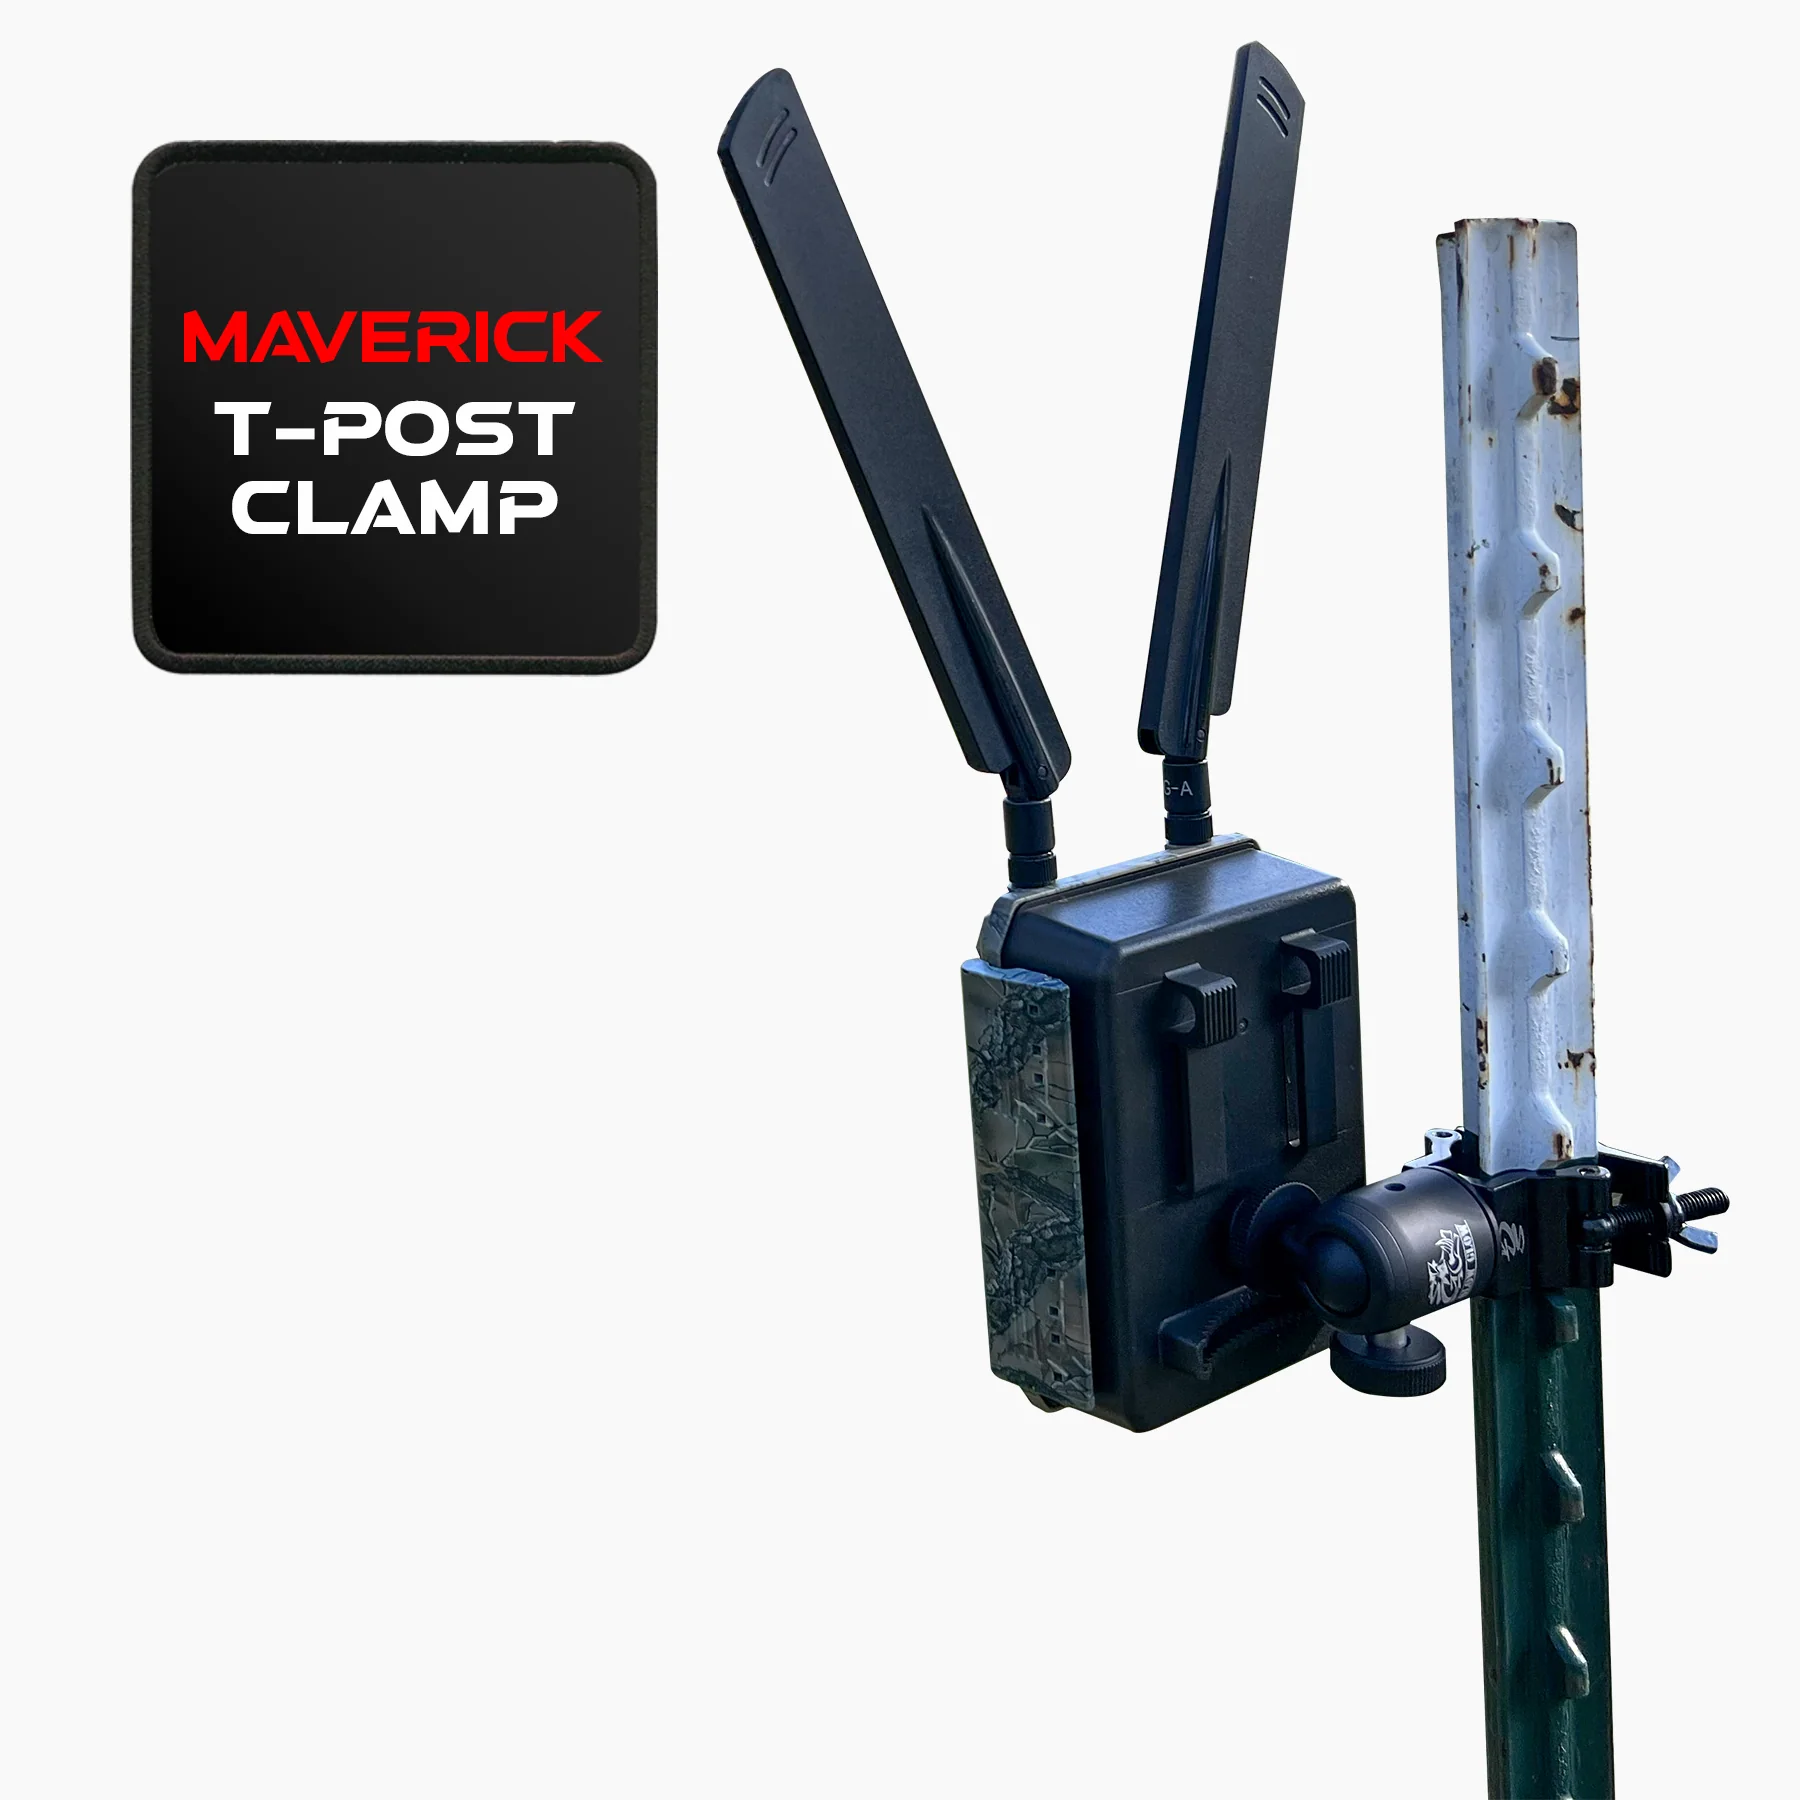 I need a trail camera mount for a tree, do these trail camera mounts only work on a t-post?